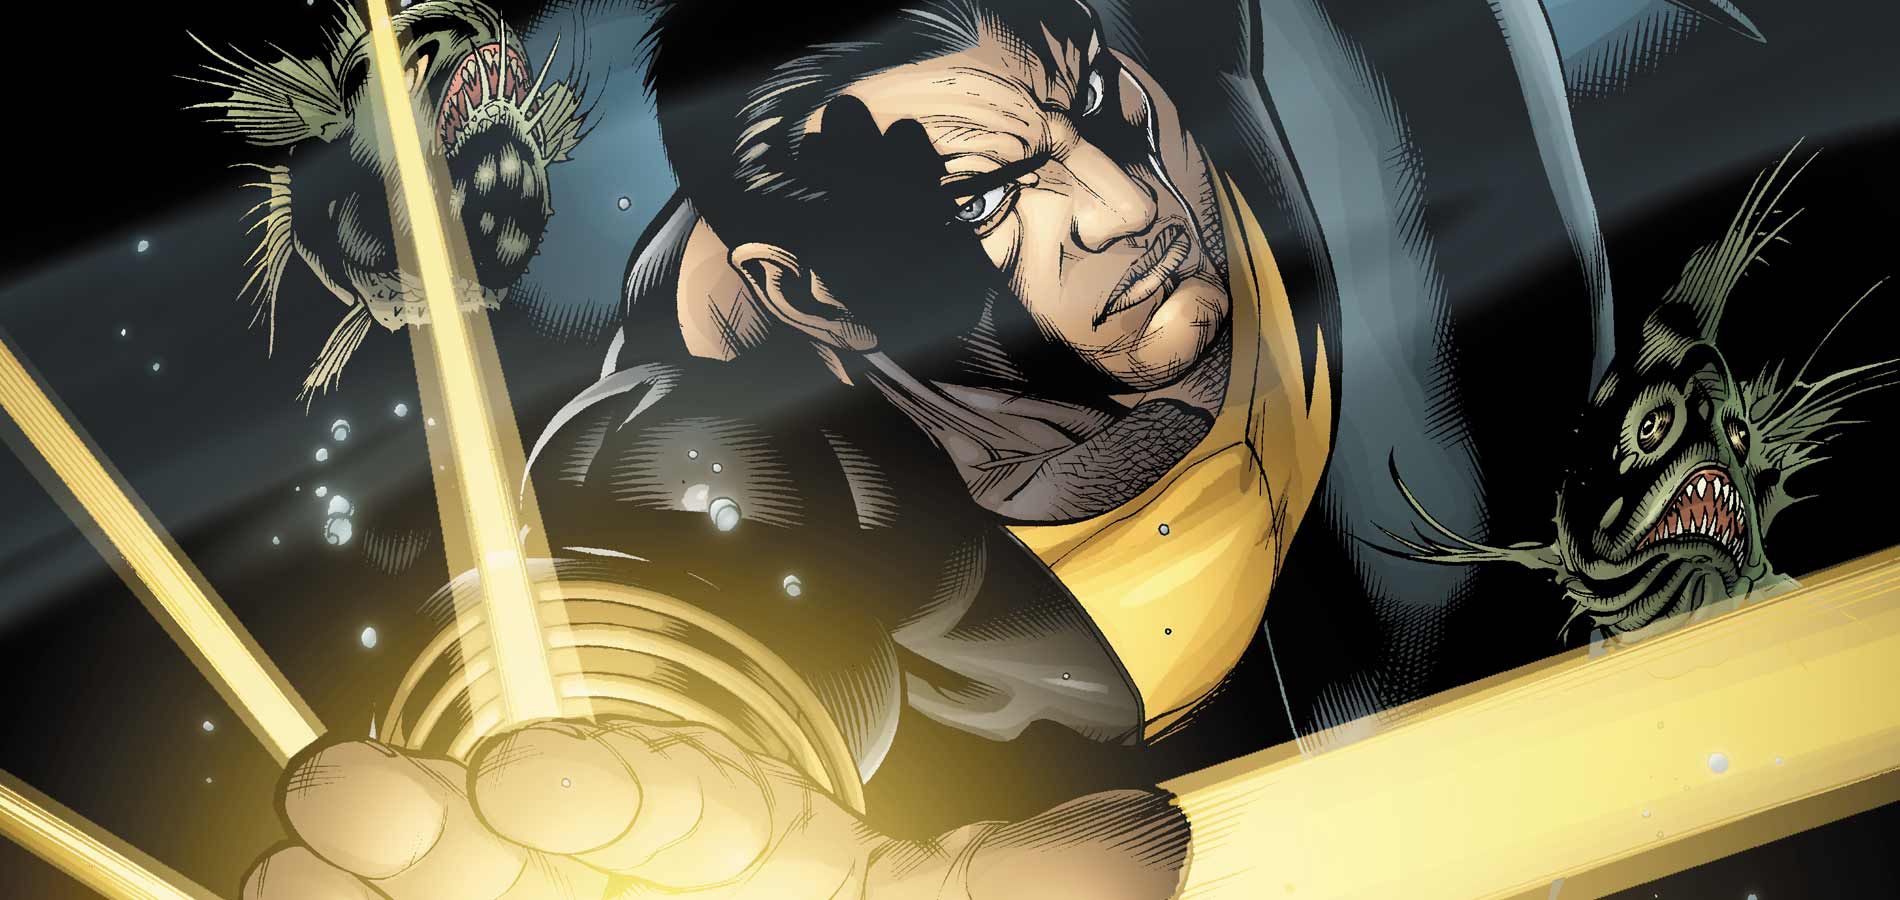 Black Adam's New Comic Is a 'Radically Different' Overhaul of a DC